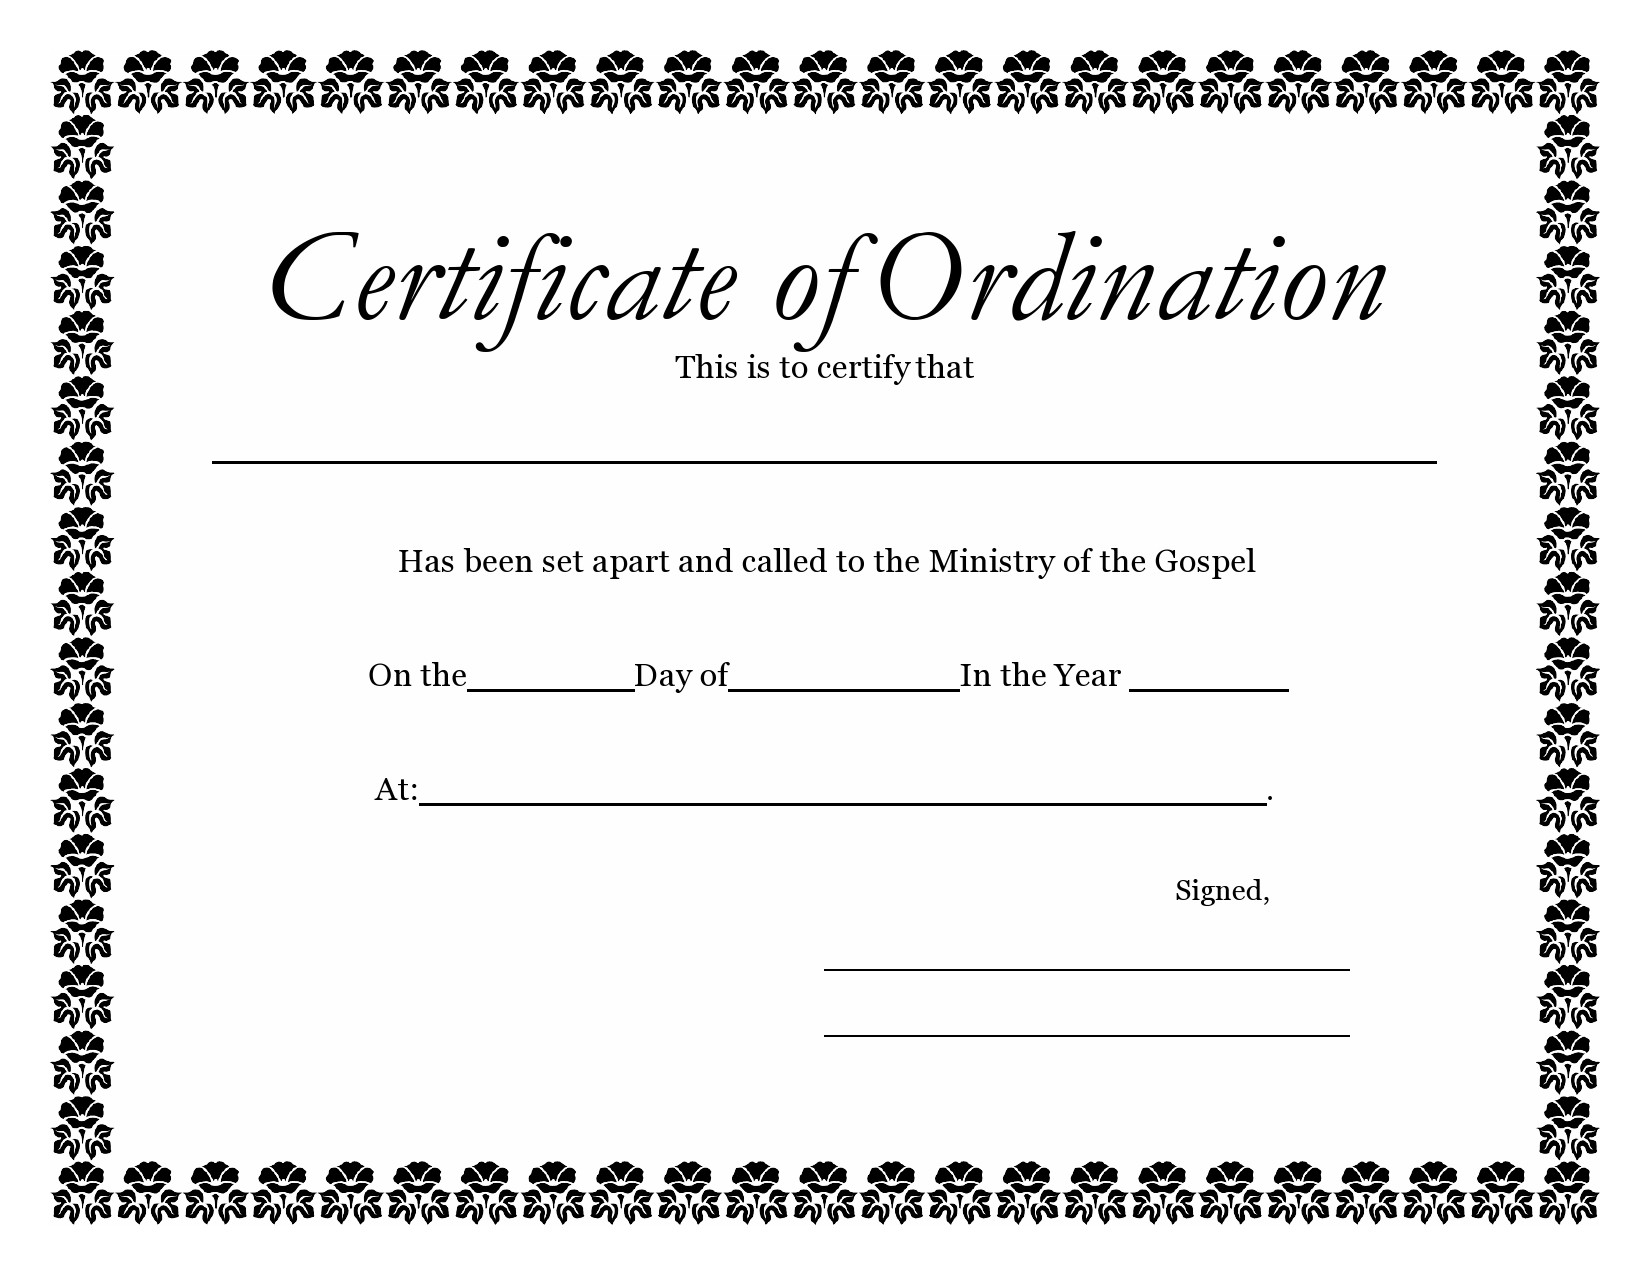 38 Ordination Certificate Templates (Free Printables)